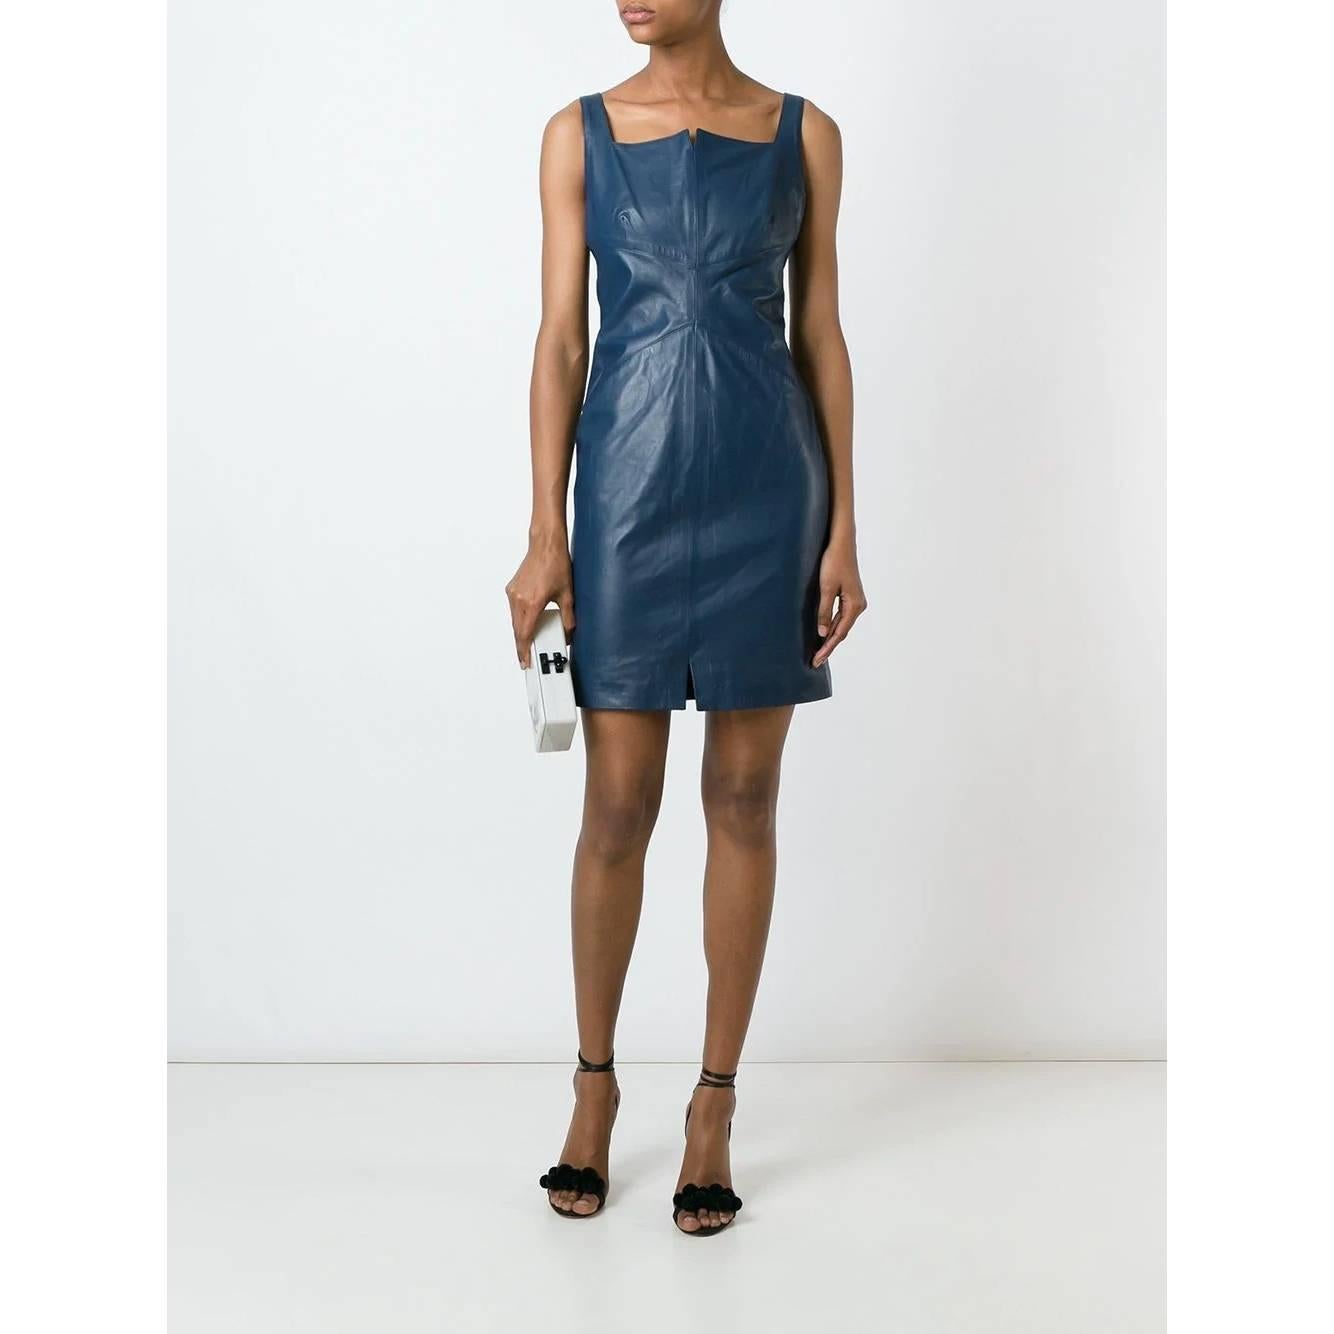 A.N.G.E.L.O. Vintage - ITALY
Romeo Gigli blue leather dress. Model with square neckline and sleeveless. Side zip fastening. Above the knee length.

The product has some signs of wear on the leather of the straps, as shown in the pictures.

Years: